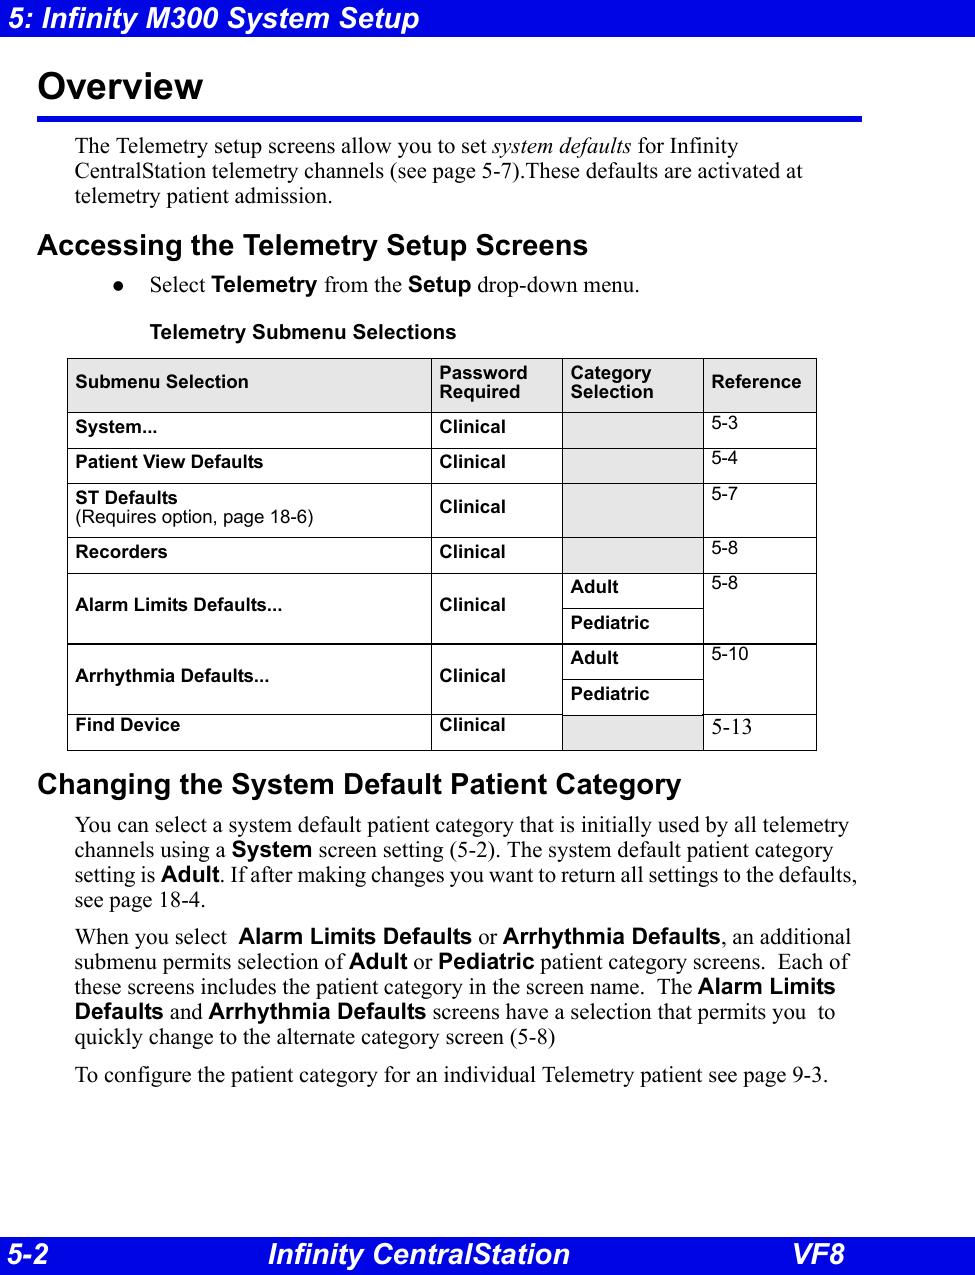 5-2 Infinity CentralStation VF85: Infinity M300 System SetupOverview The Telemetry setup screens allow you to set system defaults for Infinity CentralStation telemetry channels (see page 5-7).These defaults are activated at telemetry patient admission.Accessing the Telemetry Setup ScreenszSelect Telemetry from the Setup drop-down menu.Changing the System Default Patient CategoryYou can select a system default patient category that is initially used by all telemetry channels using a System screen setting (5-2). The system default patient category setting is Adult. If after making changes you want to return all settings to the defaults, see page 18-4.When you select  Alarm Limits Defaults or Arrhythmia Defaults, an additional submenu permits selection of Adult or Pediatric patient category screens.  Each of these screens includes the patient category in the screen name.  The Alarm Limits Defaults and Arrhythmia Defaults screens have a selection that permits you  to quickly change to the alternate category screen (5-8)To configure the patient category for an individual Telemetry patient see page 9-3.Telemetry Submenu SelectionsSubmenu Selection PasswordRequiredCategory Selection ReferenceSystem... Clinical 5-3Patient View Defaults Clinical 5-4ST Defaults (Requires option, page 18-6) Clinical 5-7Recorders Clinical 5-8Alarm Limits Defaults... Clinical Adult 5-8PediatricArrhythmia Defaults... ClinicalAdult 5-10PediatricFind Device  Clinical 5-13